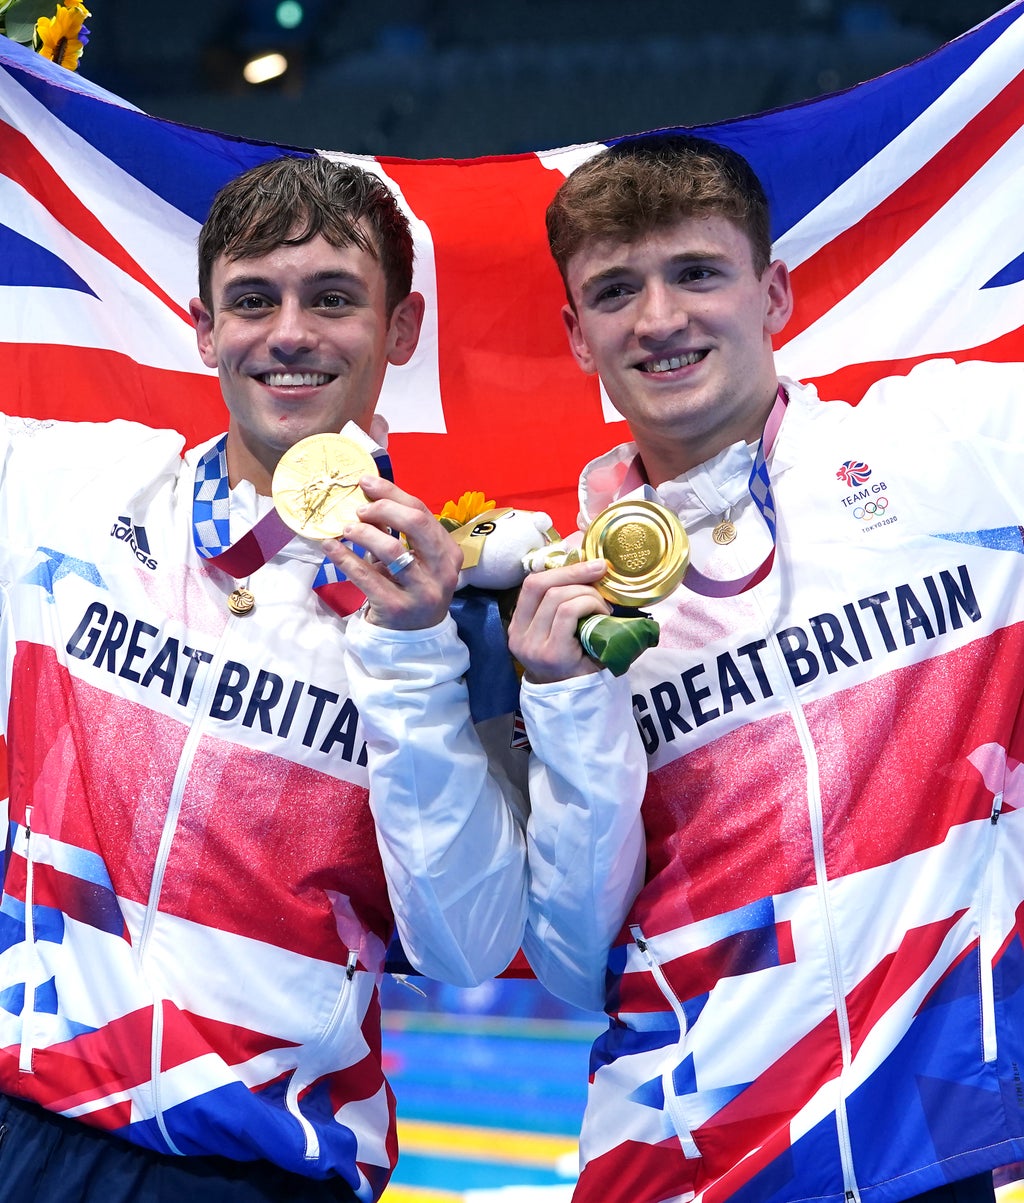 Daley and Peaty celebrate Olympic gold in Tokyo – Monday’s sporting social